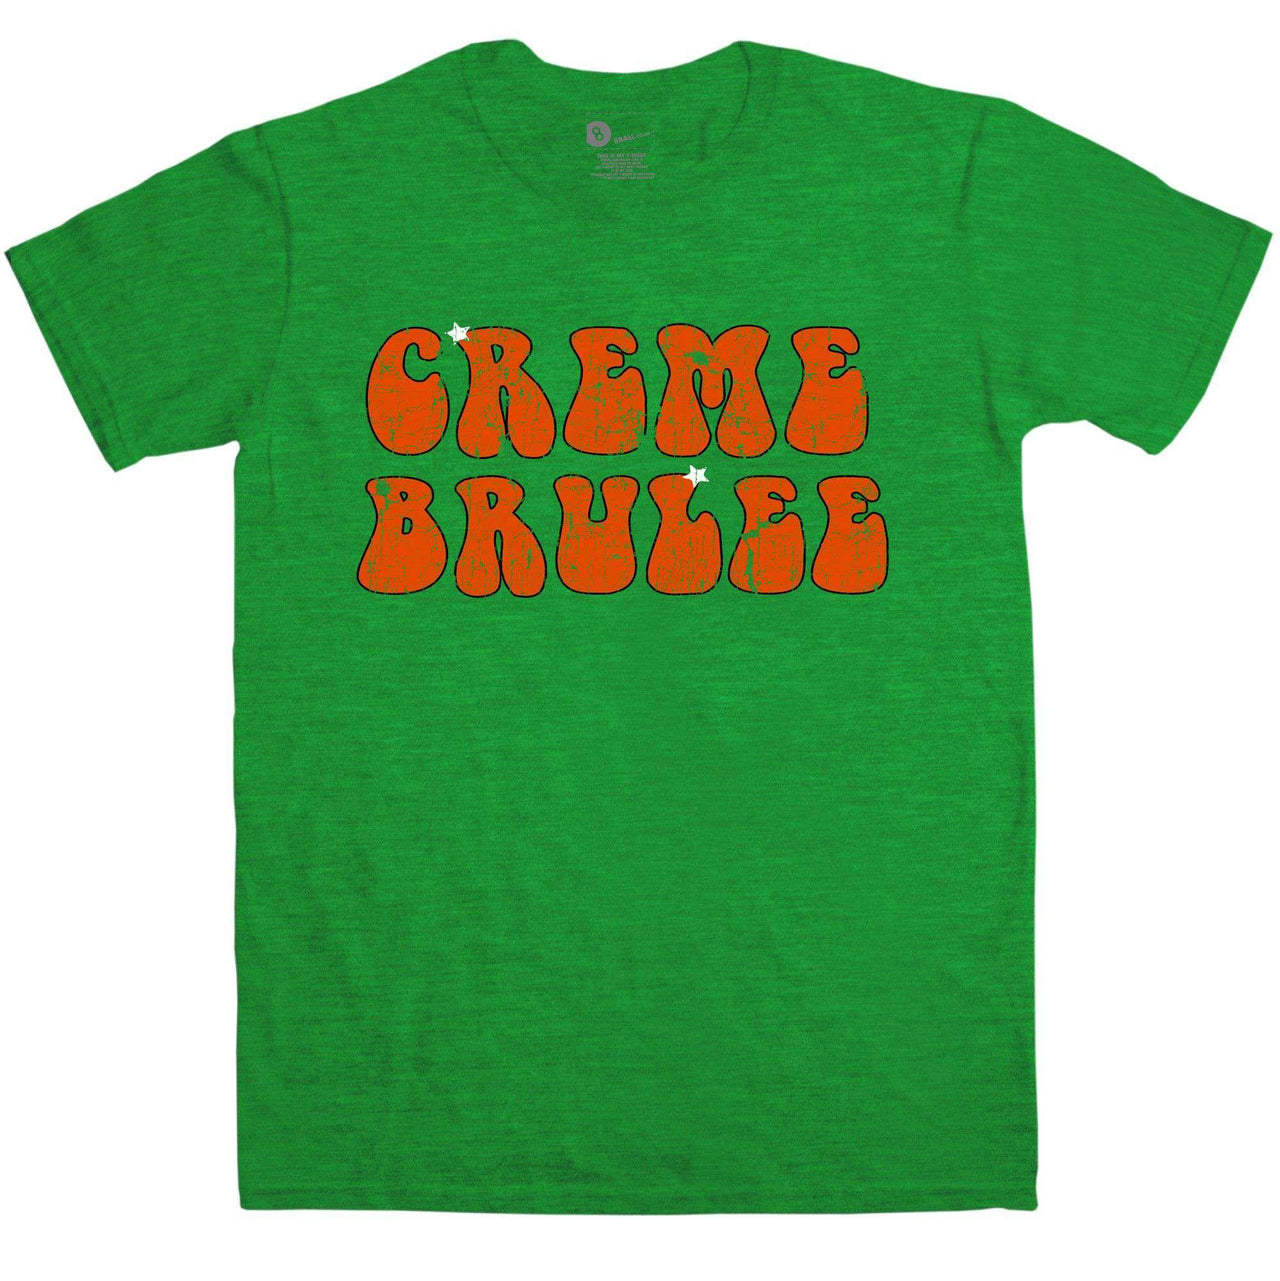 Creme Brulee Graphic T-Shirt For Men, Inspired By The League Of Gentlemen 8Ball